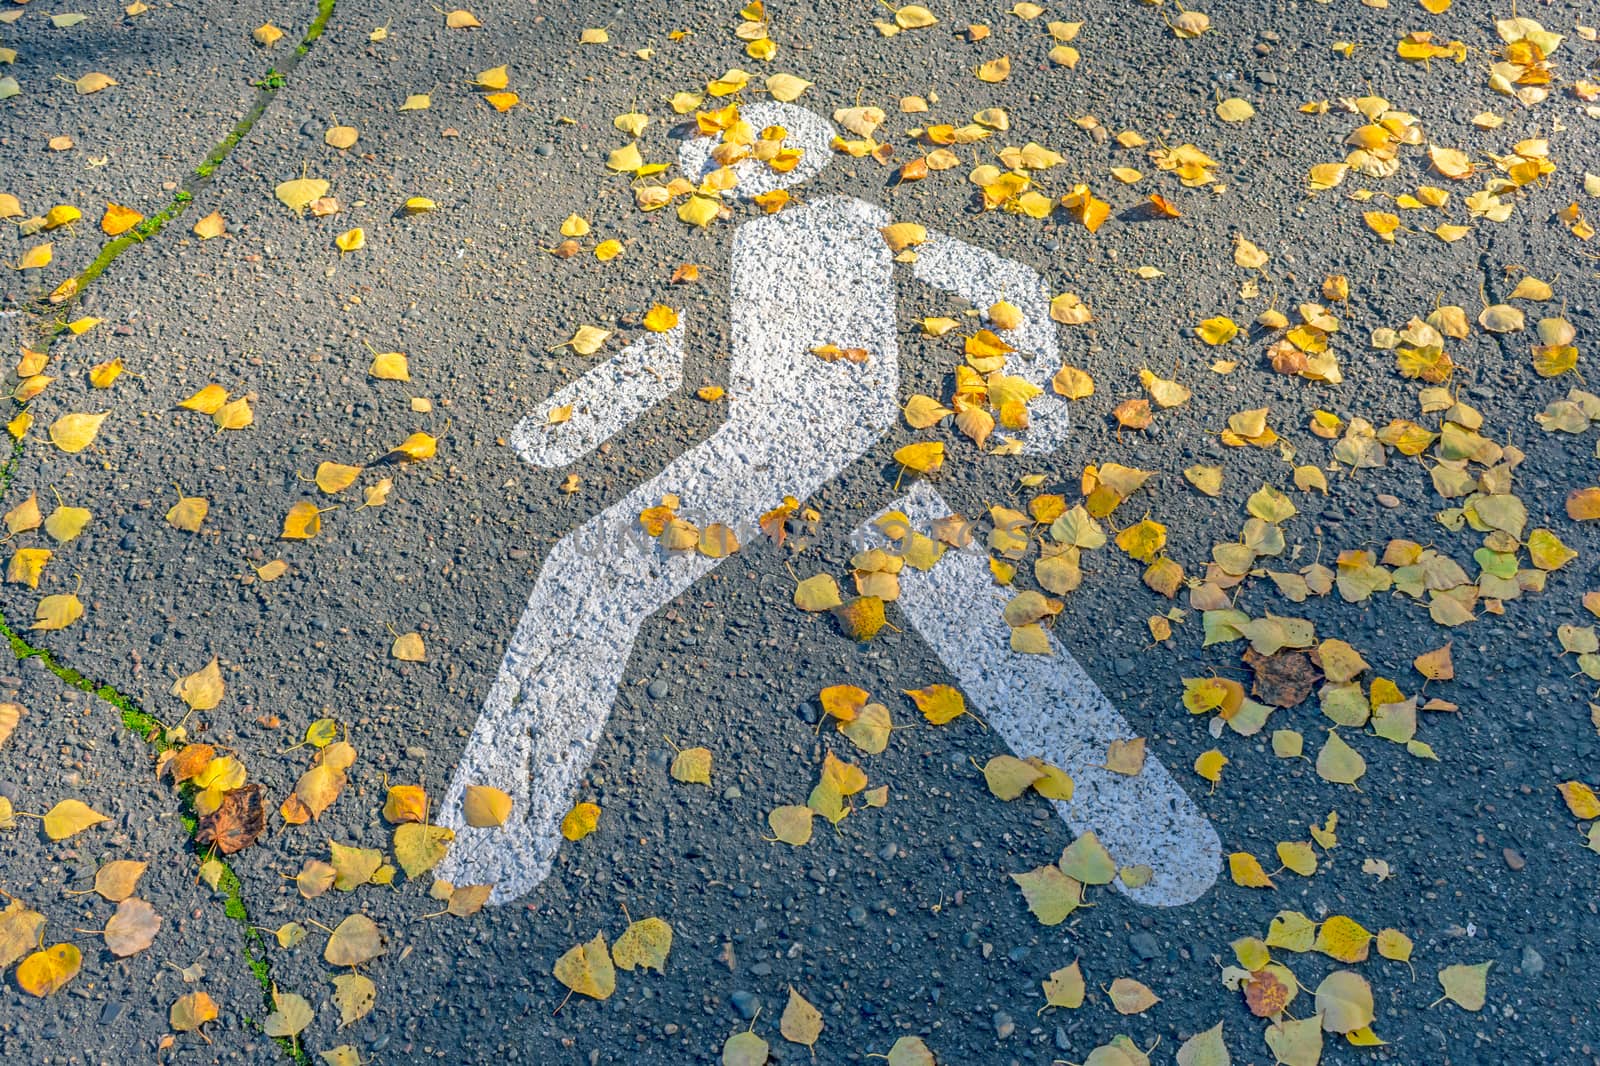 Pictured on the asphalt a pedestrian zone sign covered with autumn leaves